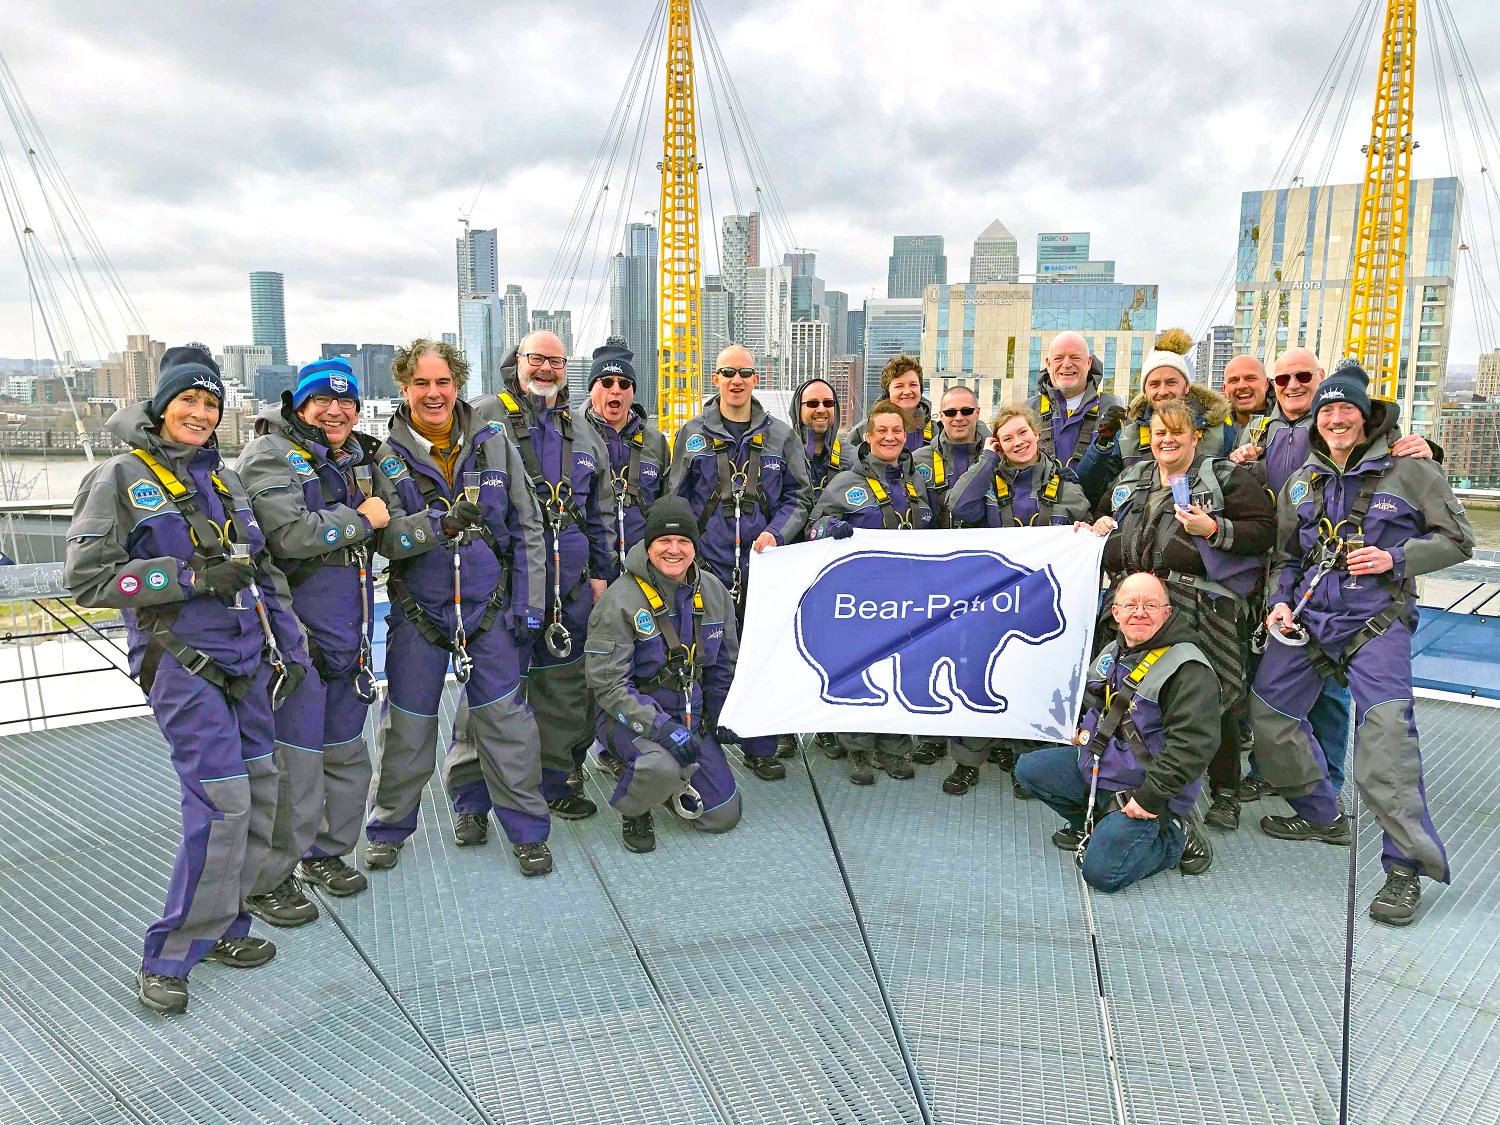 The Bear Patrol team stand on top of the O2 roof, having completed the challenge of walking across the roof.